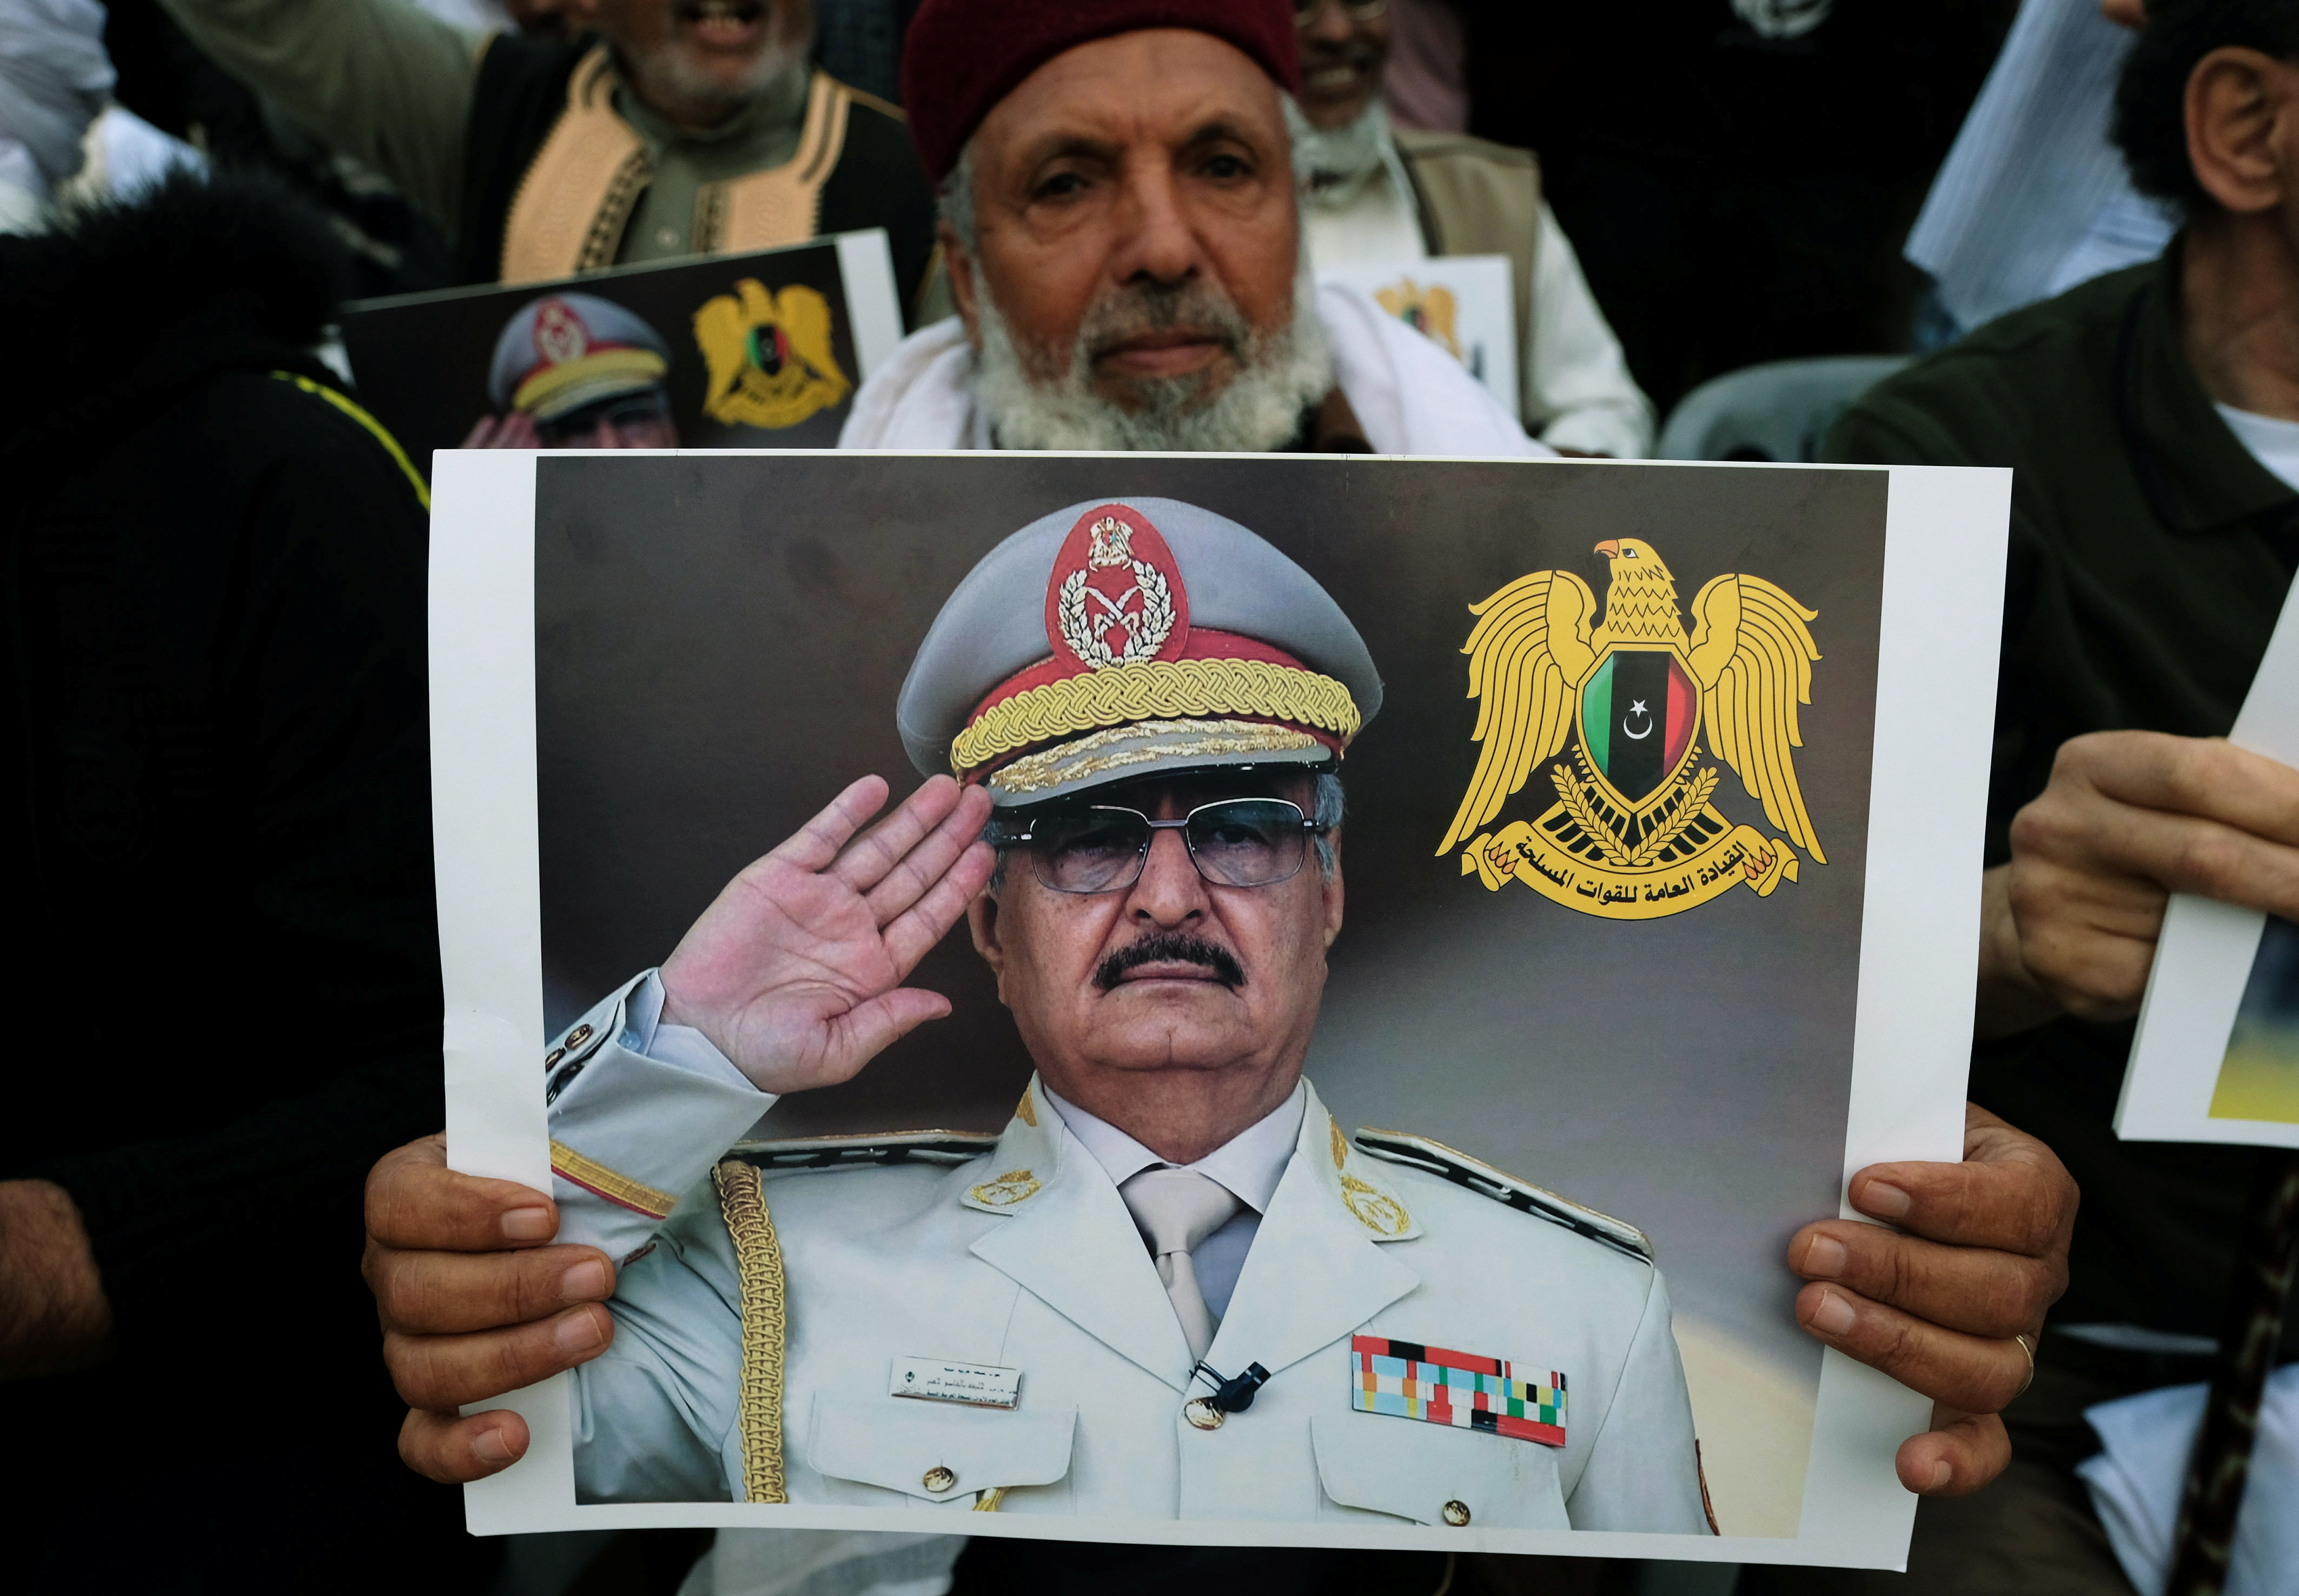 A Libyan man carries a picture of Khalifa Haftar during a demonstration to support Libyan National Army offensive against Tripoli, in Benghazi, Libya April 12, 2019. REUTERS/Esam Omran Al-Fetori - RC1B9A543040